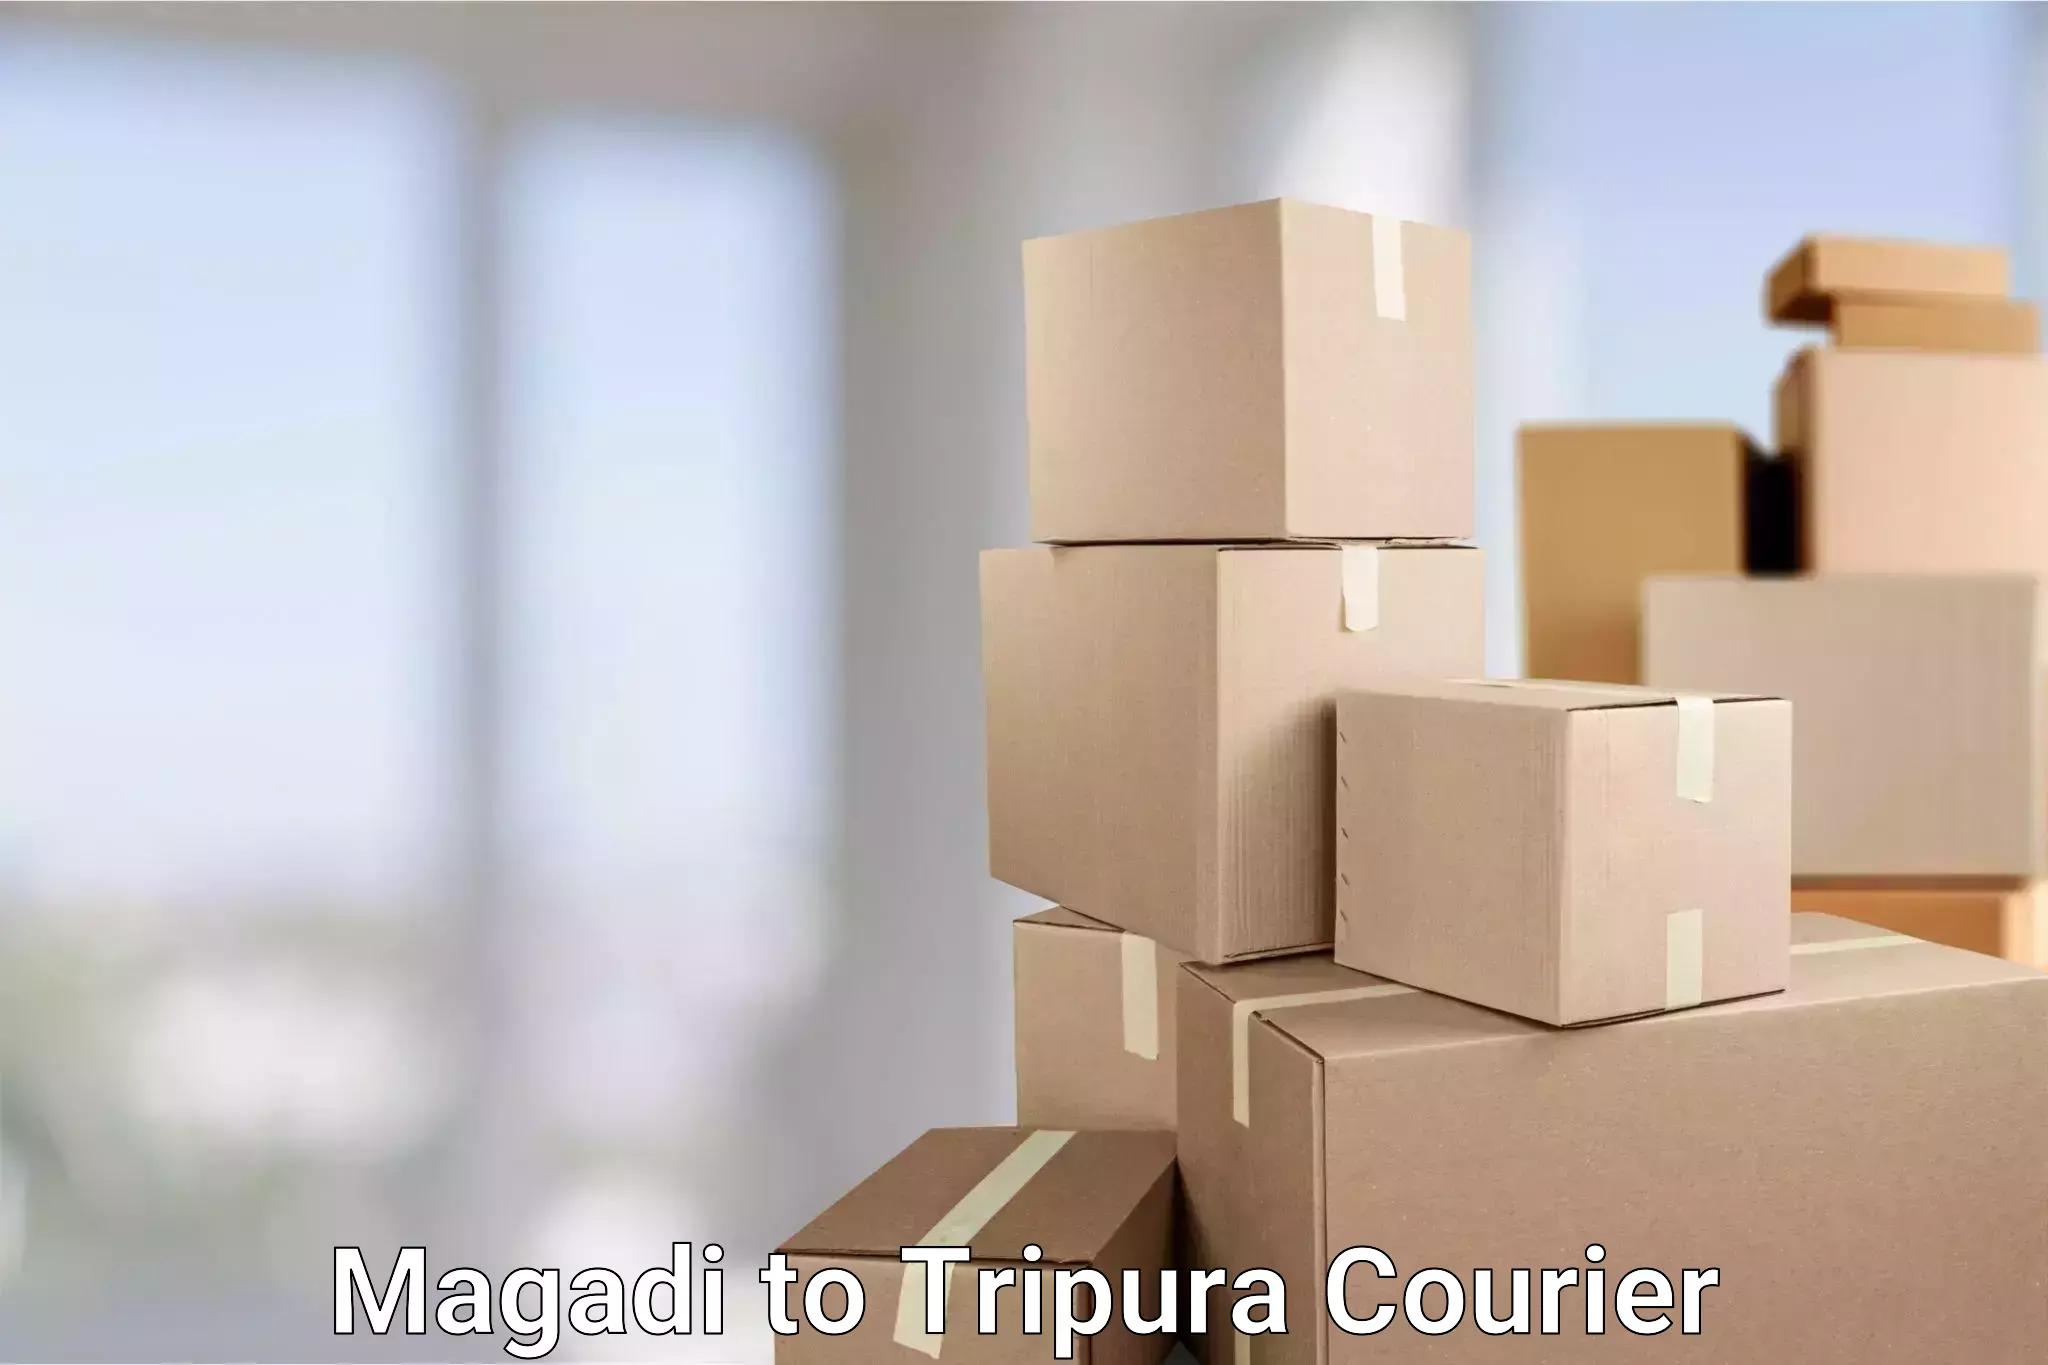 Global shipping networks Magadi to West Tripura